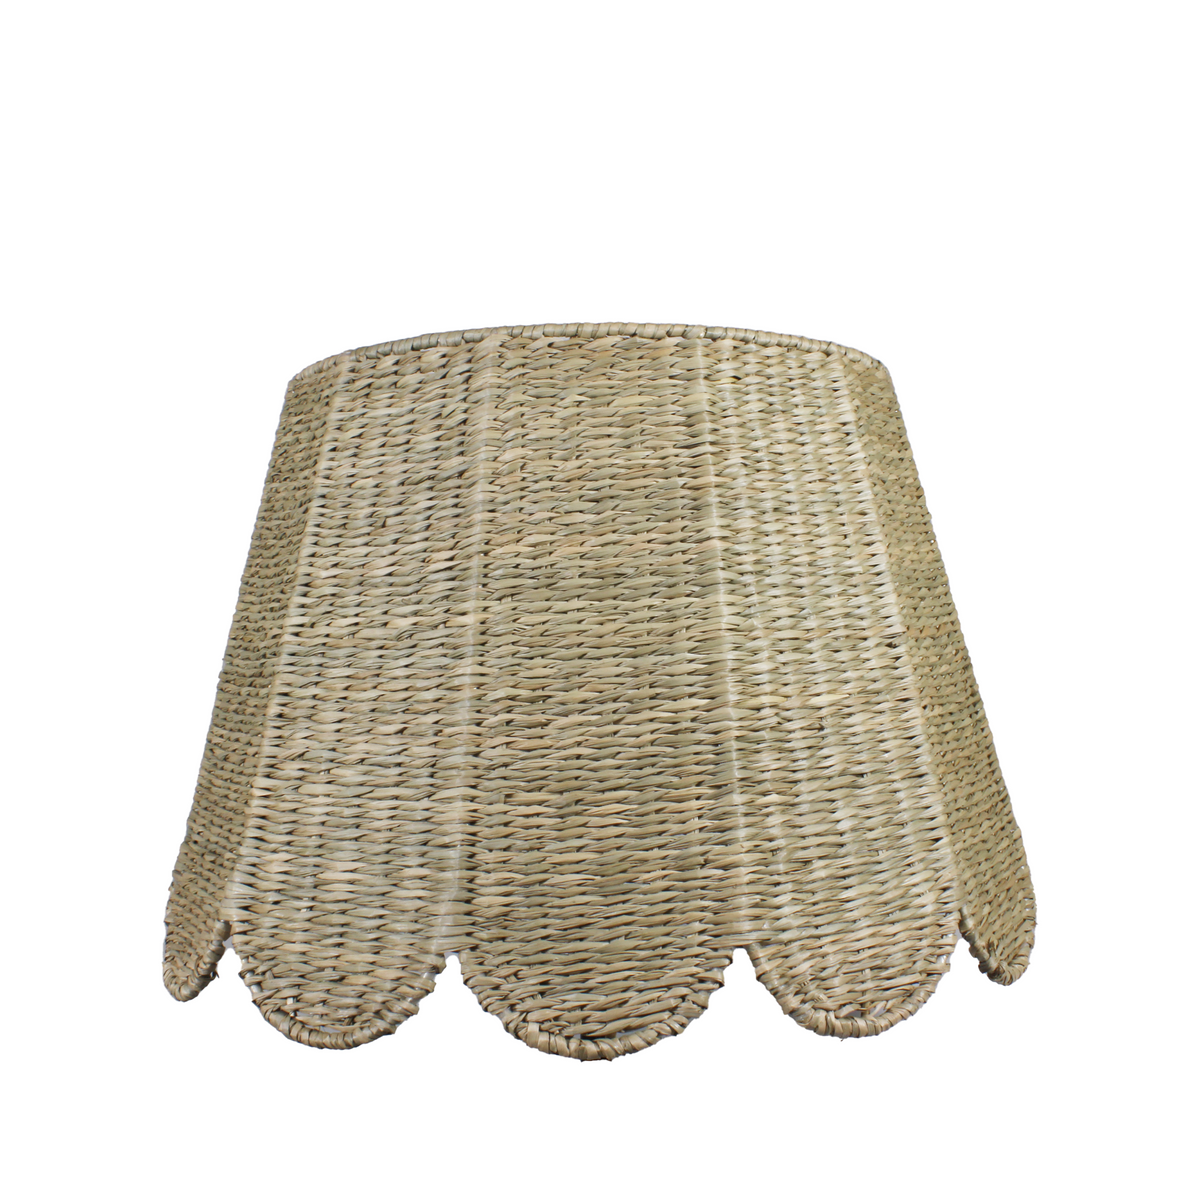 Scalloped Lampshade in Seagrass